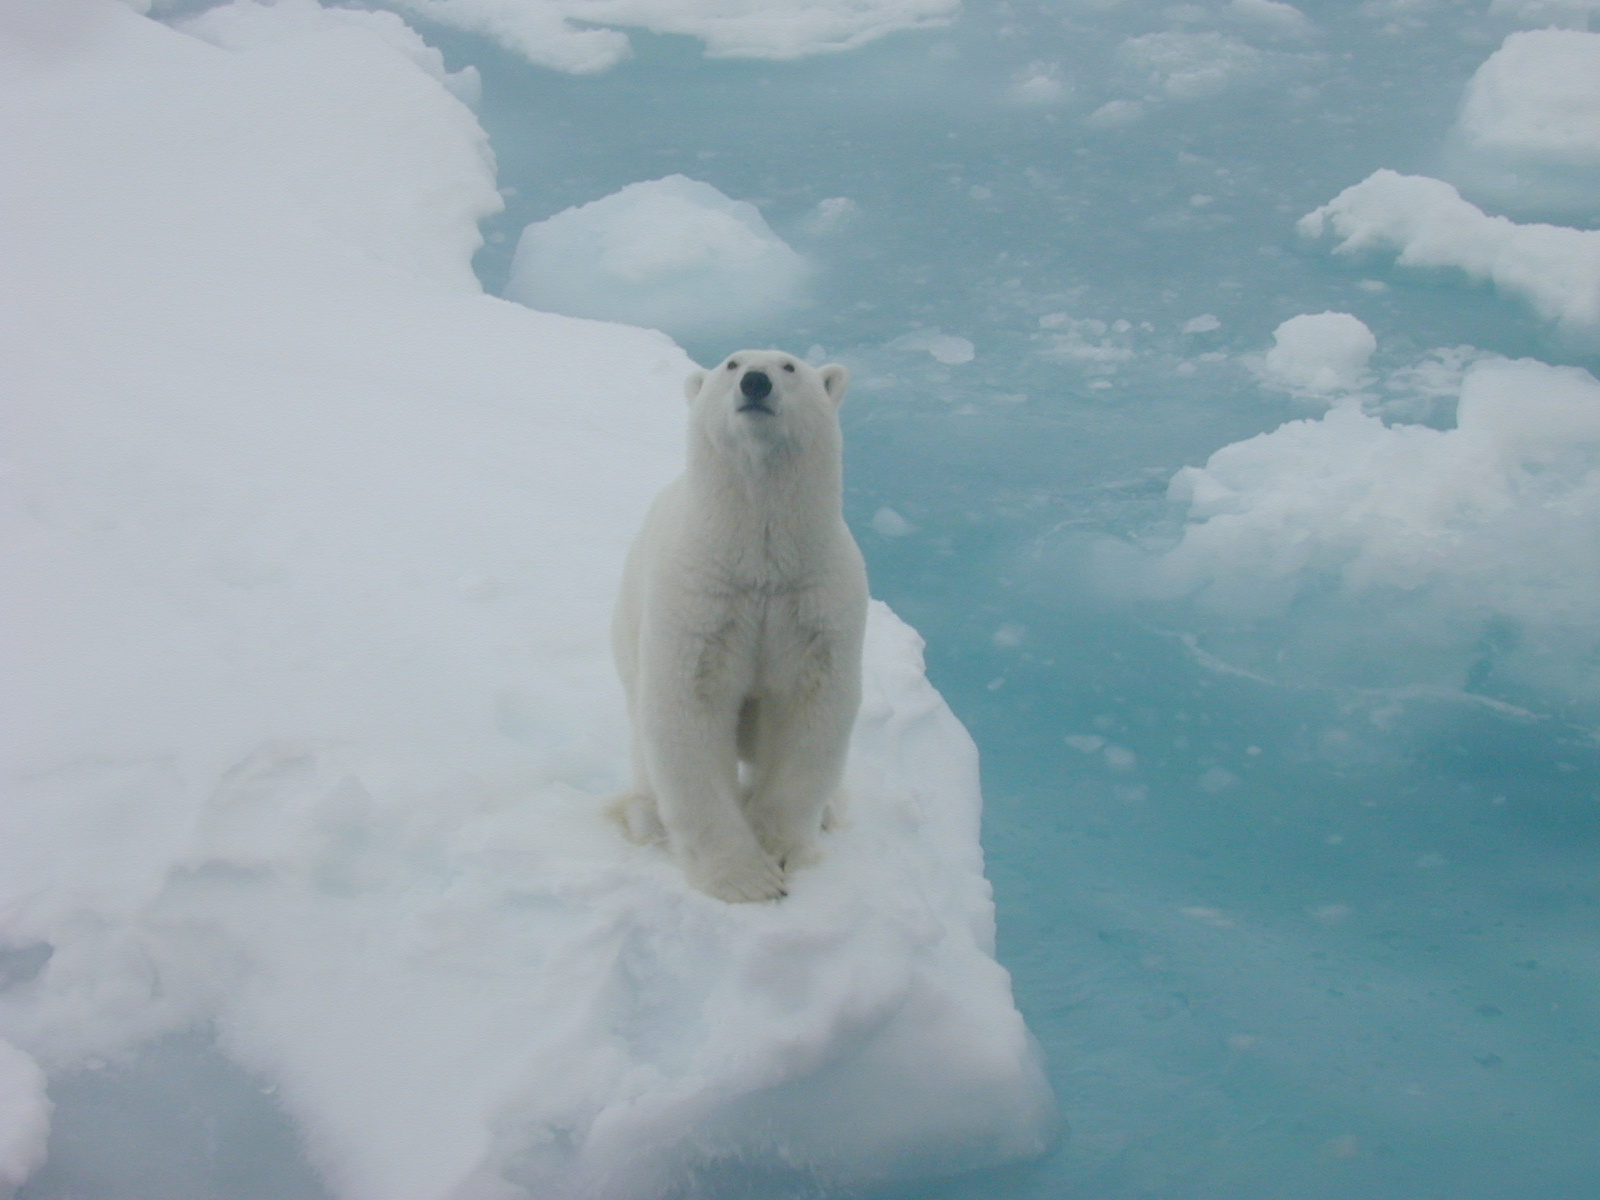 Picture of a Polar Bear courtesy of Mr. Christopher Szorc